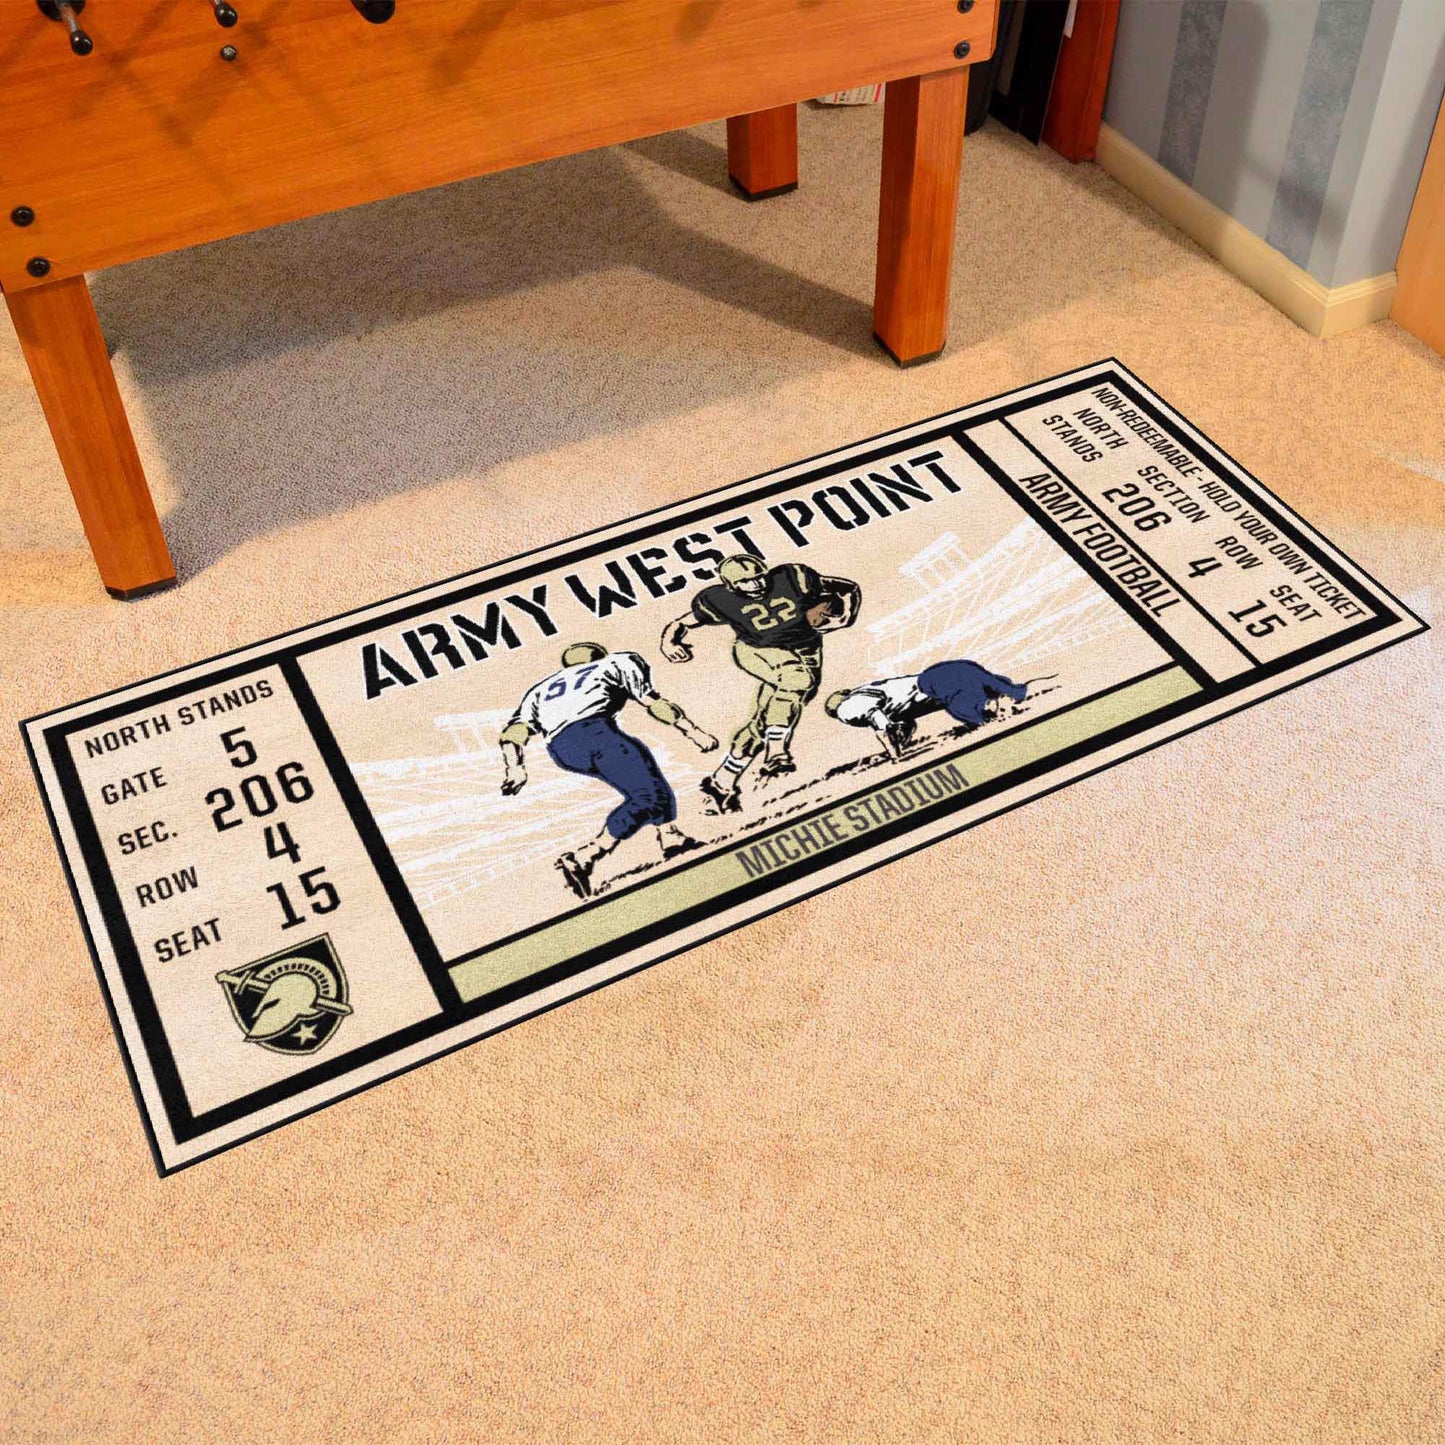 Army West Point Black Knights Ticket Runner Mat / Rug by Fanmats